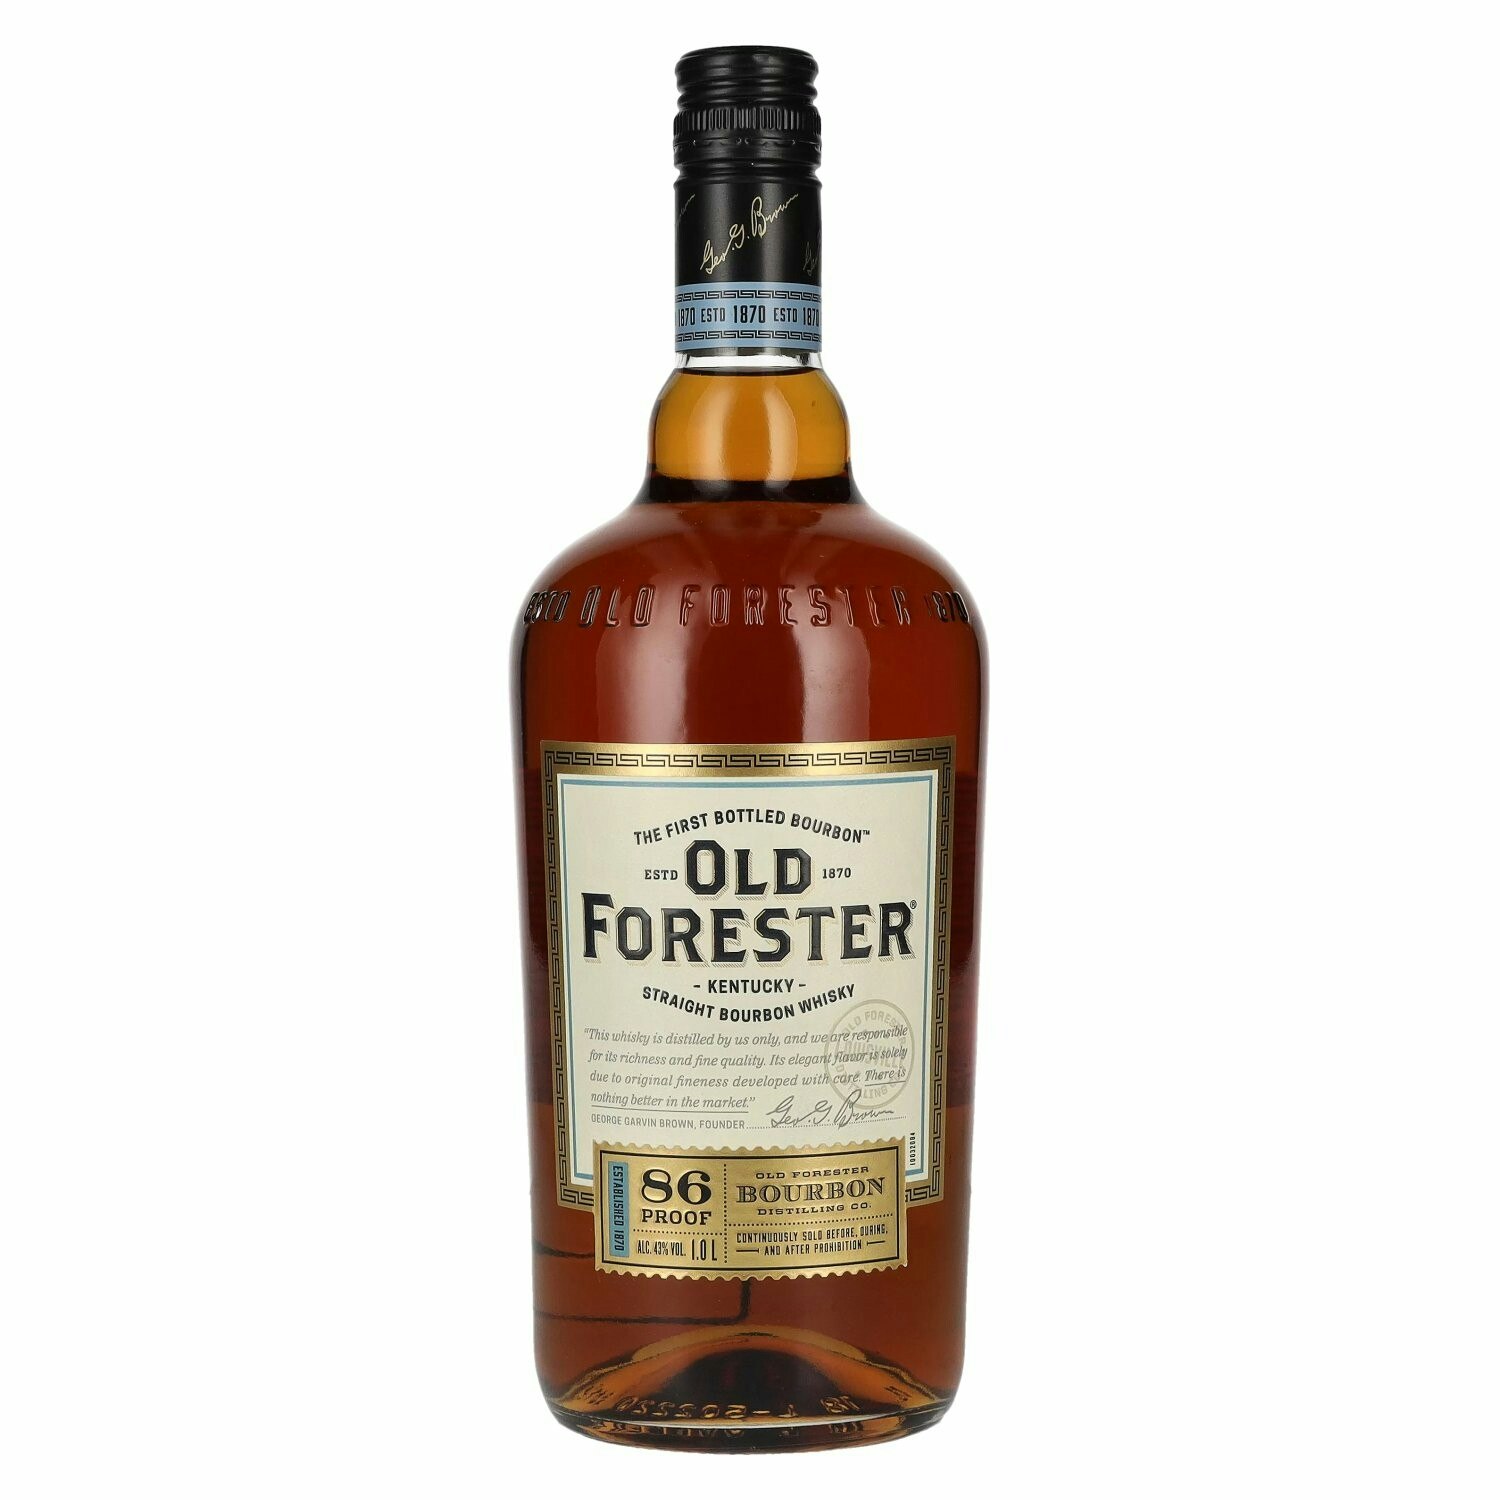 Old Forester Kentucky Straight Bourbon Whisky 43% Vol. 1l